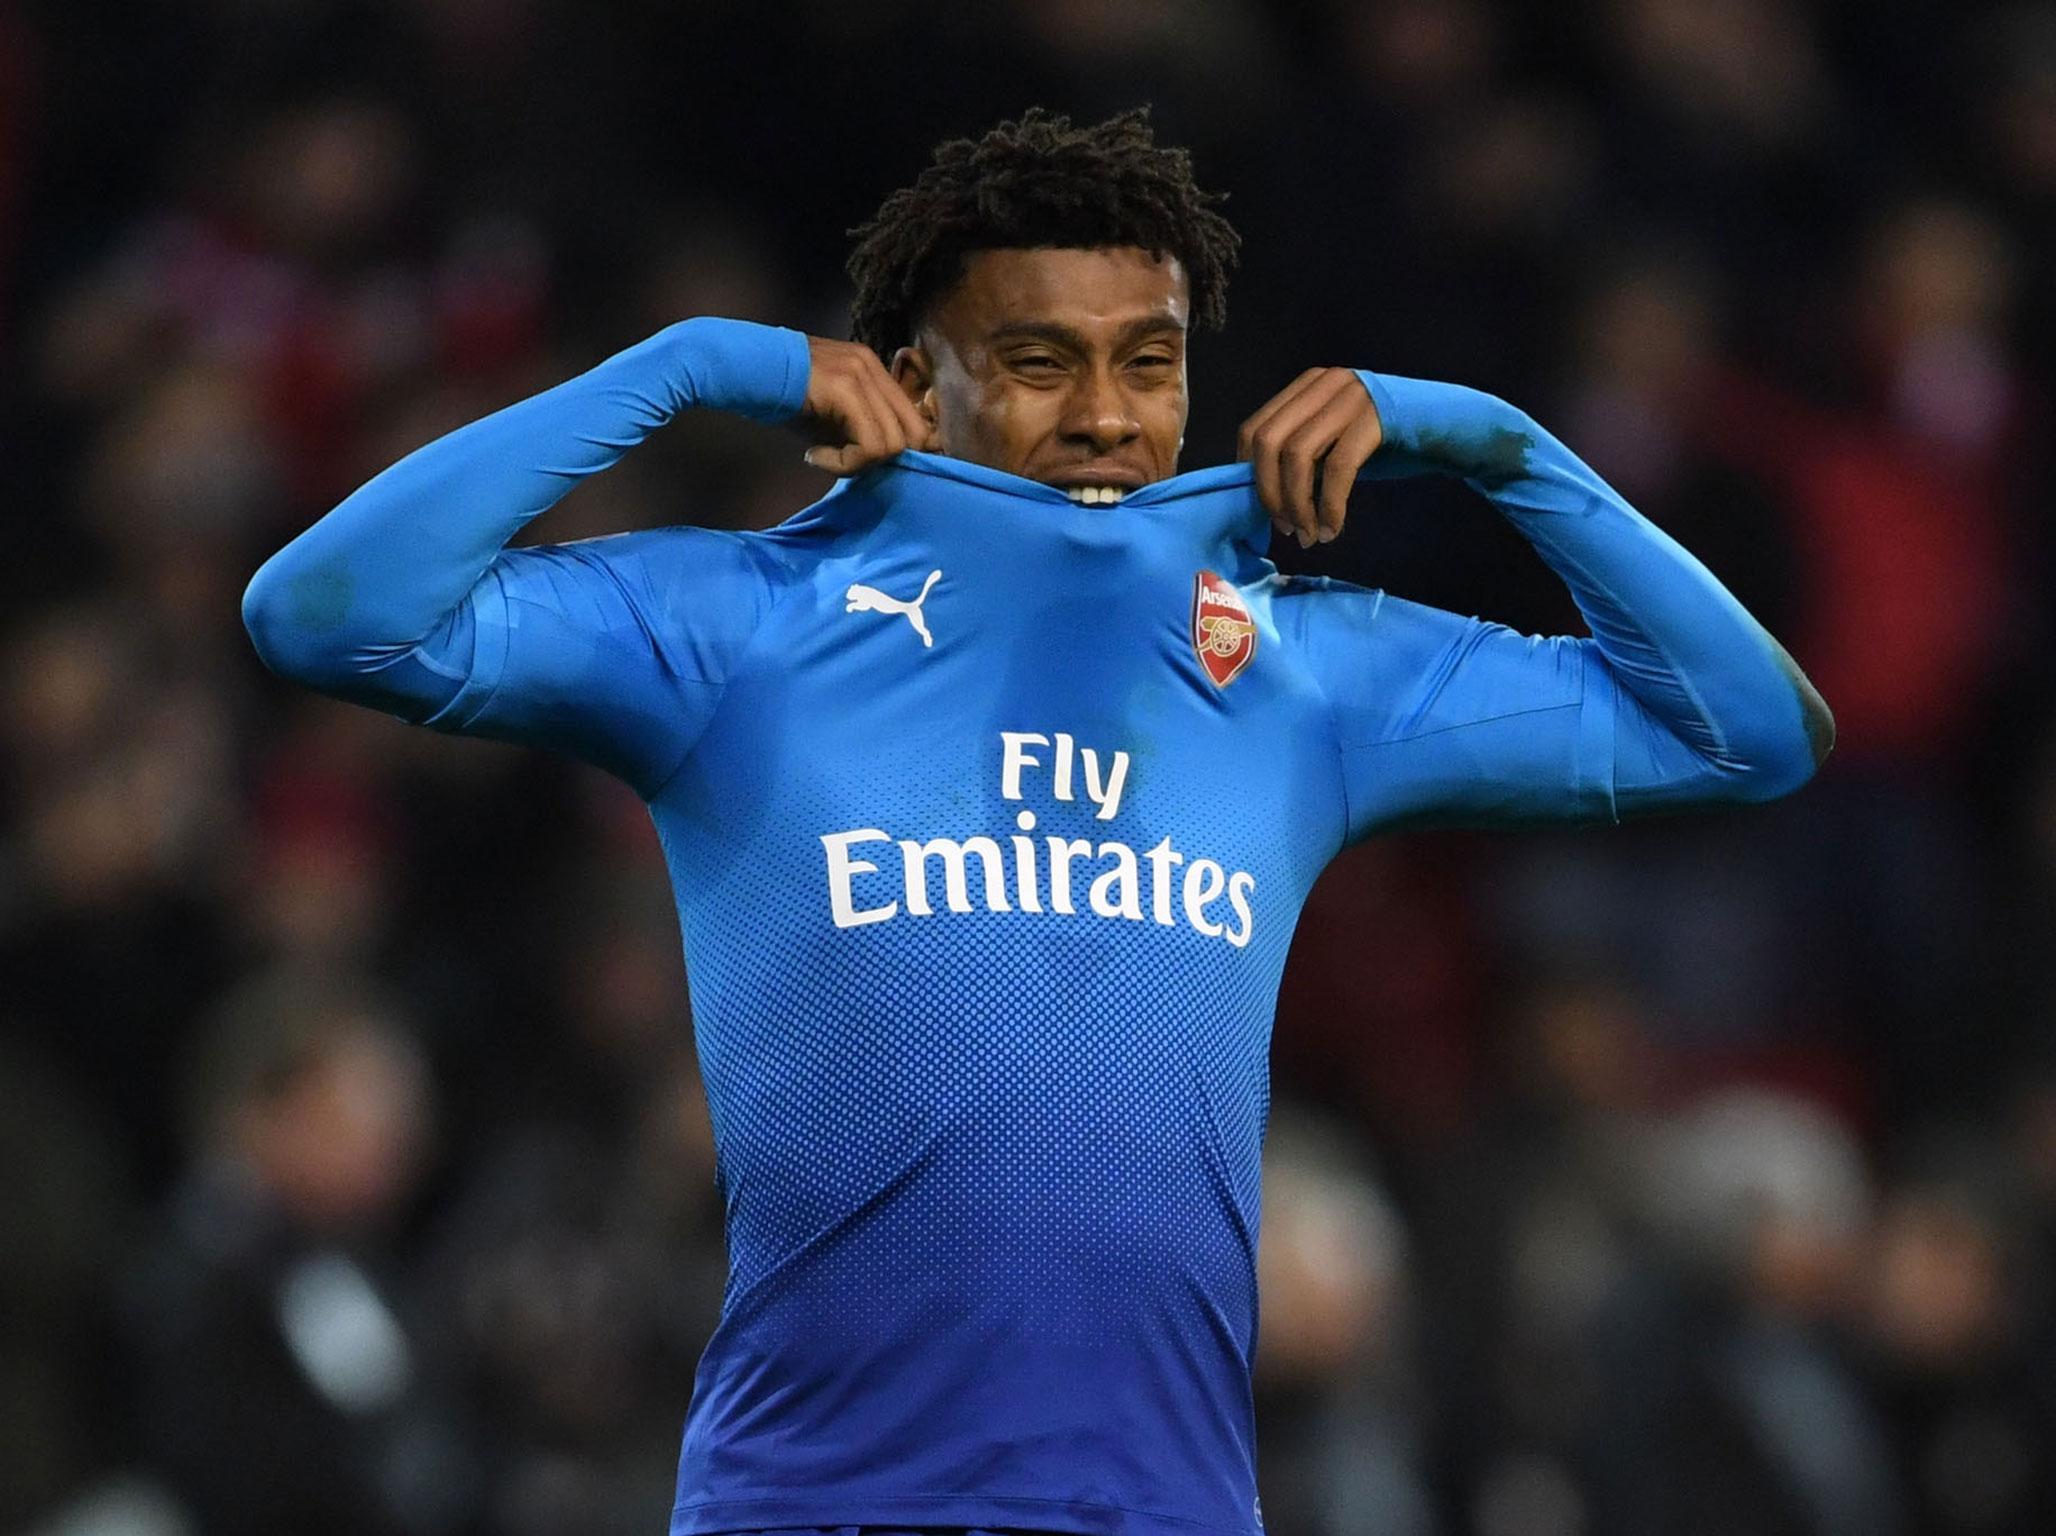 It has been claimed Iwobi partied in the early hours of Saturday morning ahead of Arsenal's defeat at Forest